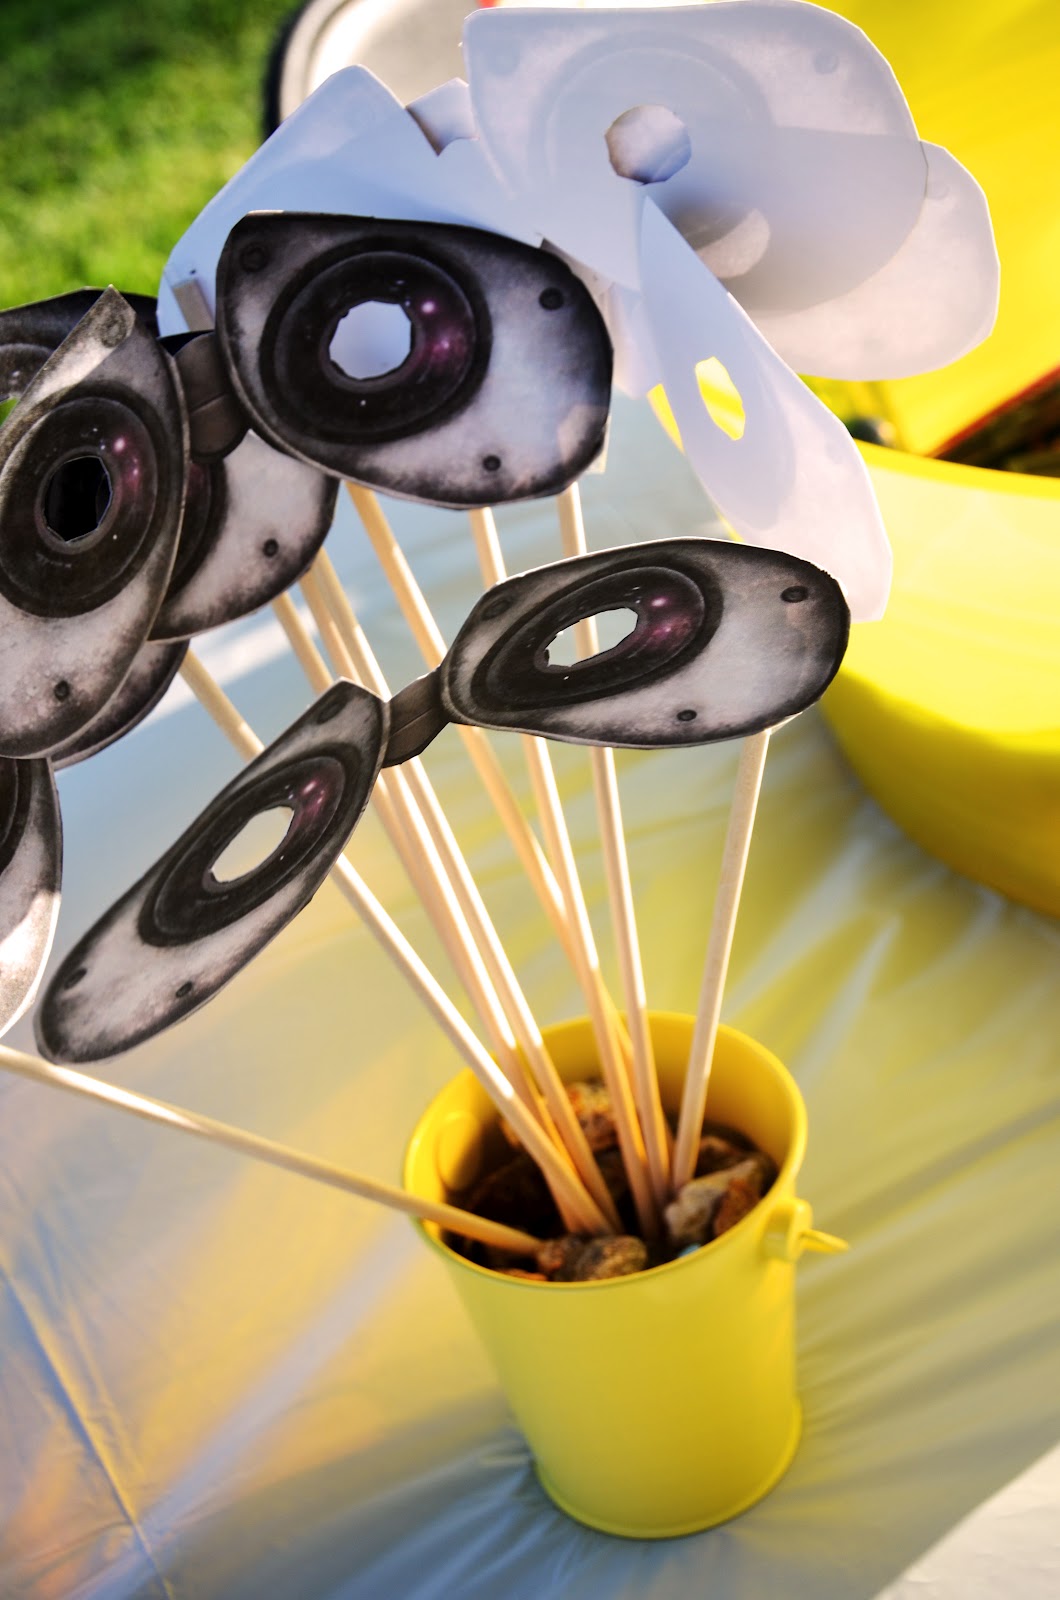 Foto Focus by A. S. W.: Disney/Pixar Wall-E Themed Birthday Party